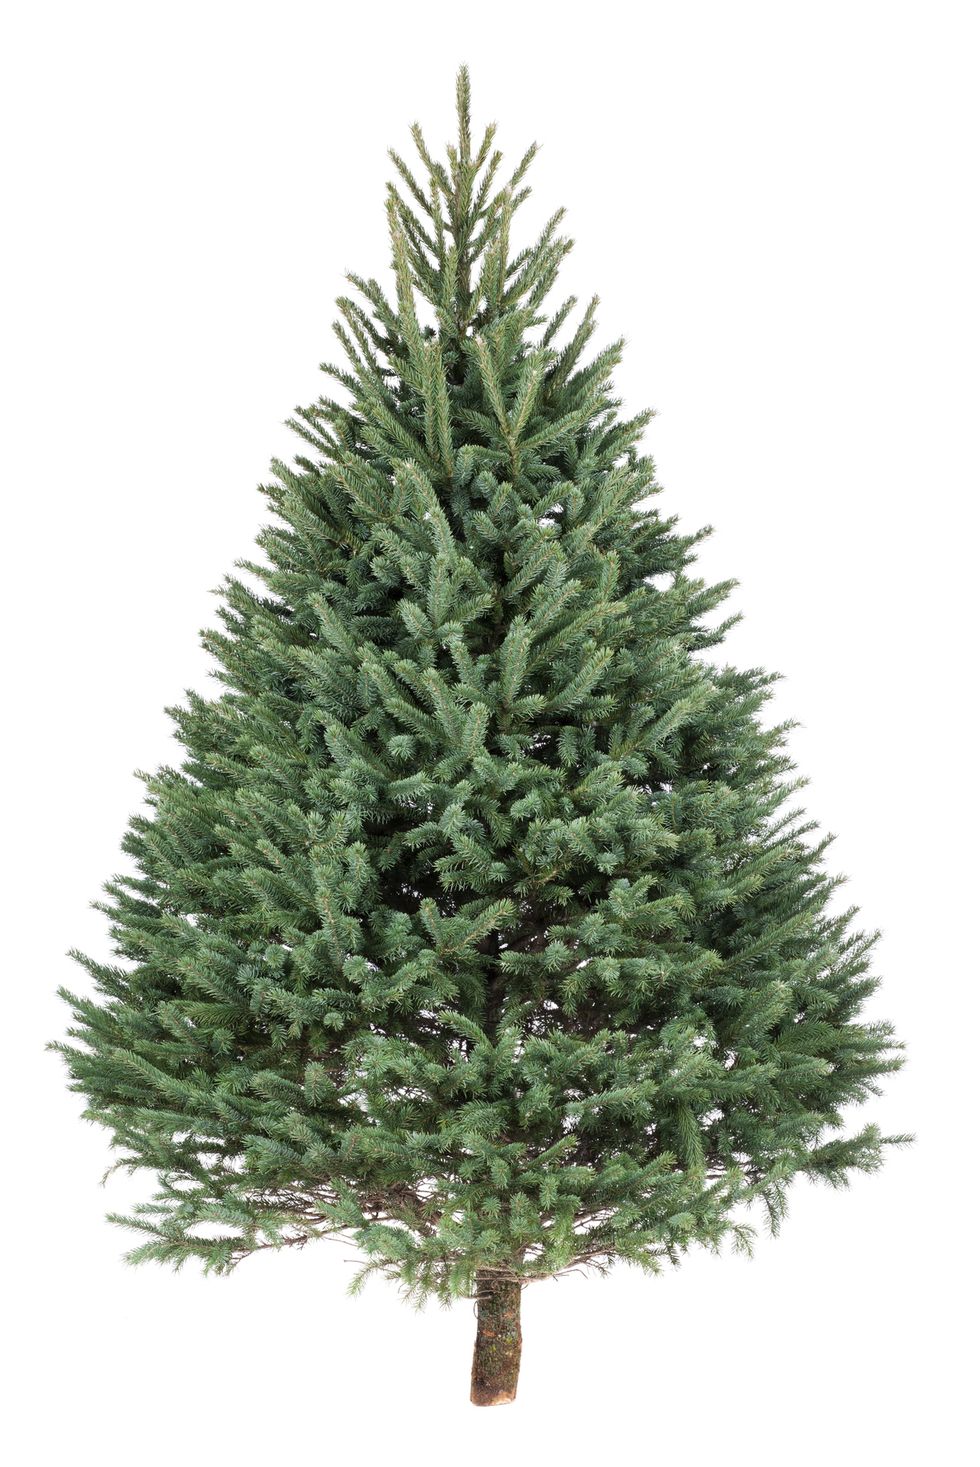 20 Most Popular Types of Christmas Trees and Tree Varieties